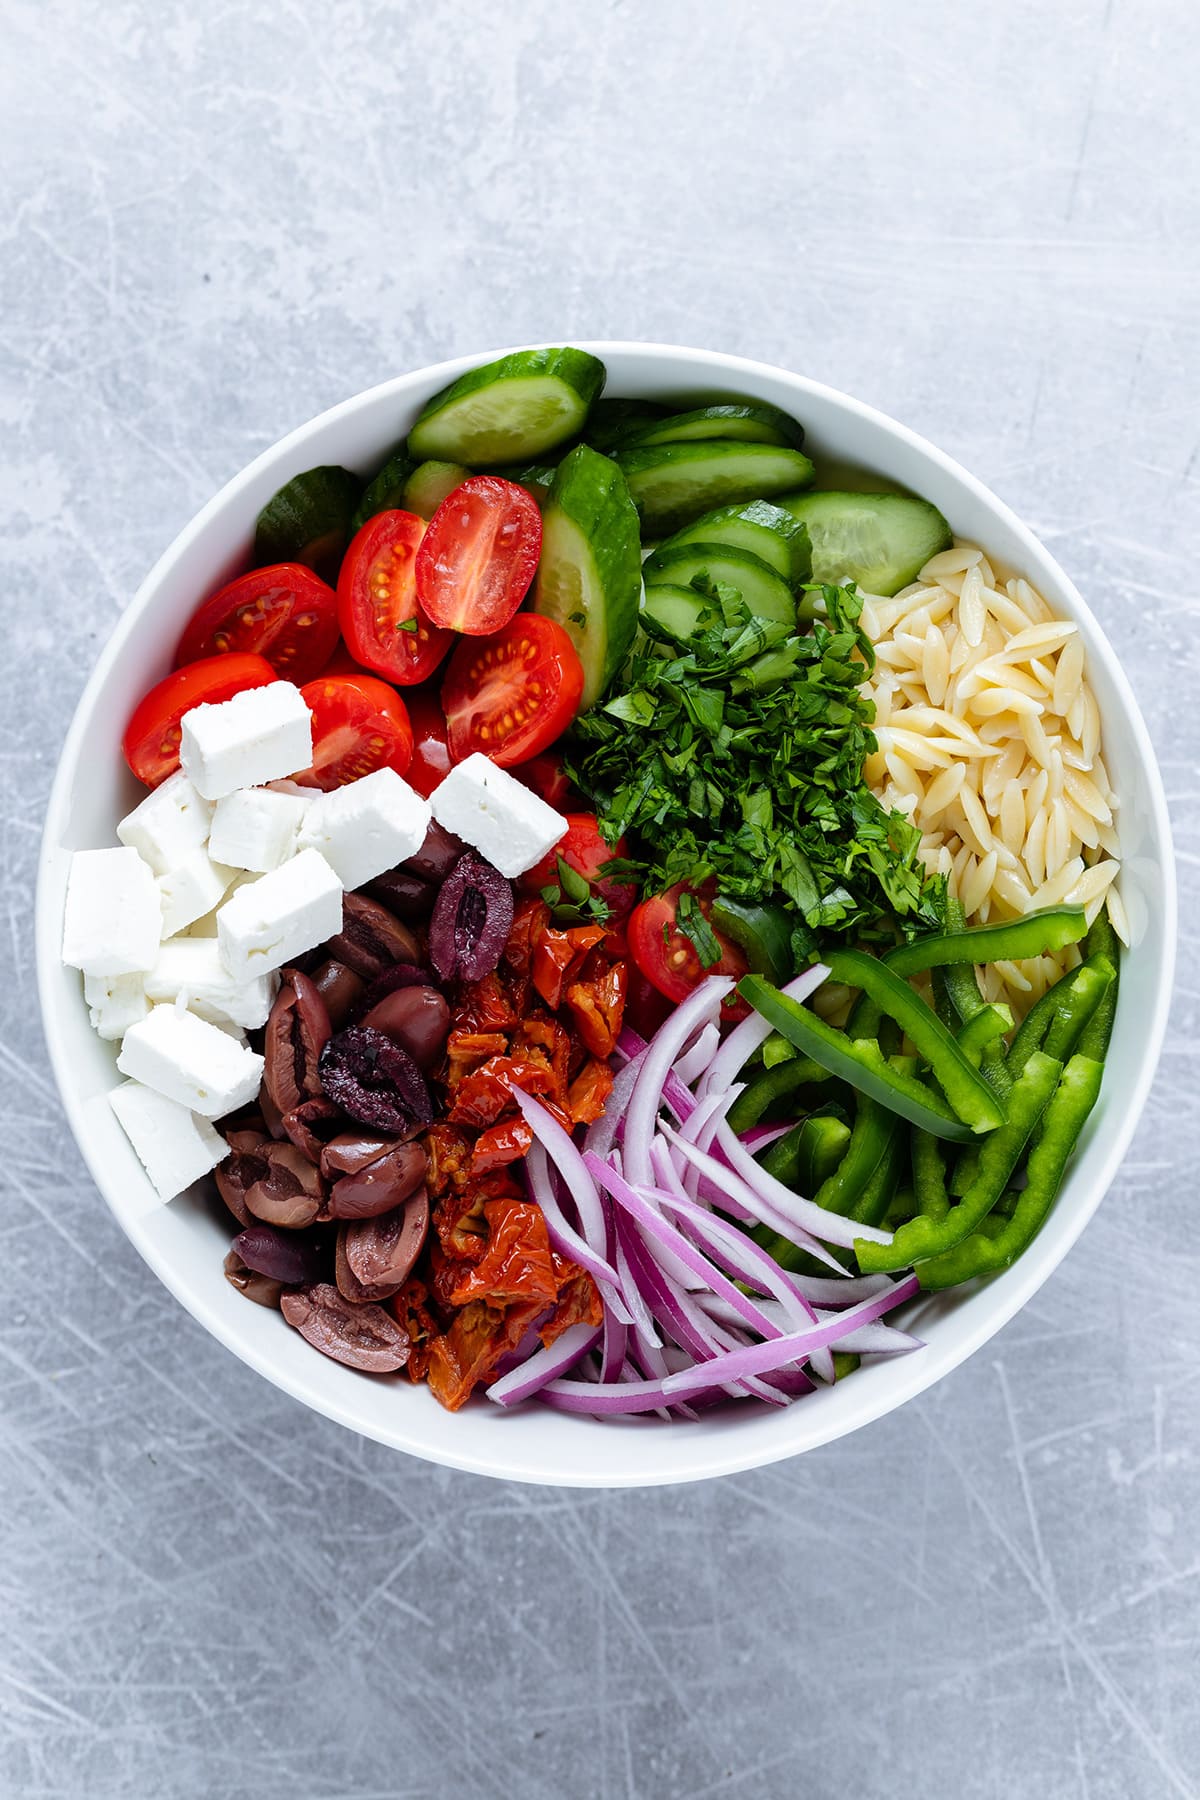 Ingredients for greek orzo salad like feta, olives, and vegetables separately laid out in a large bowl.